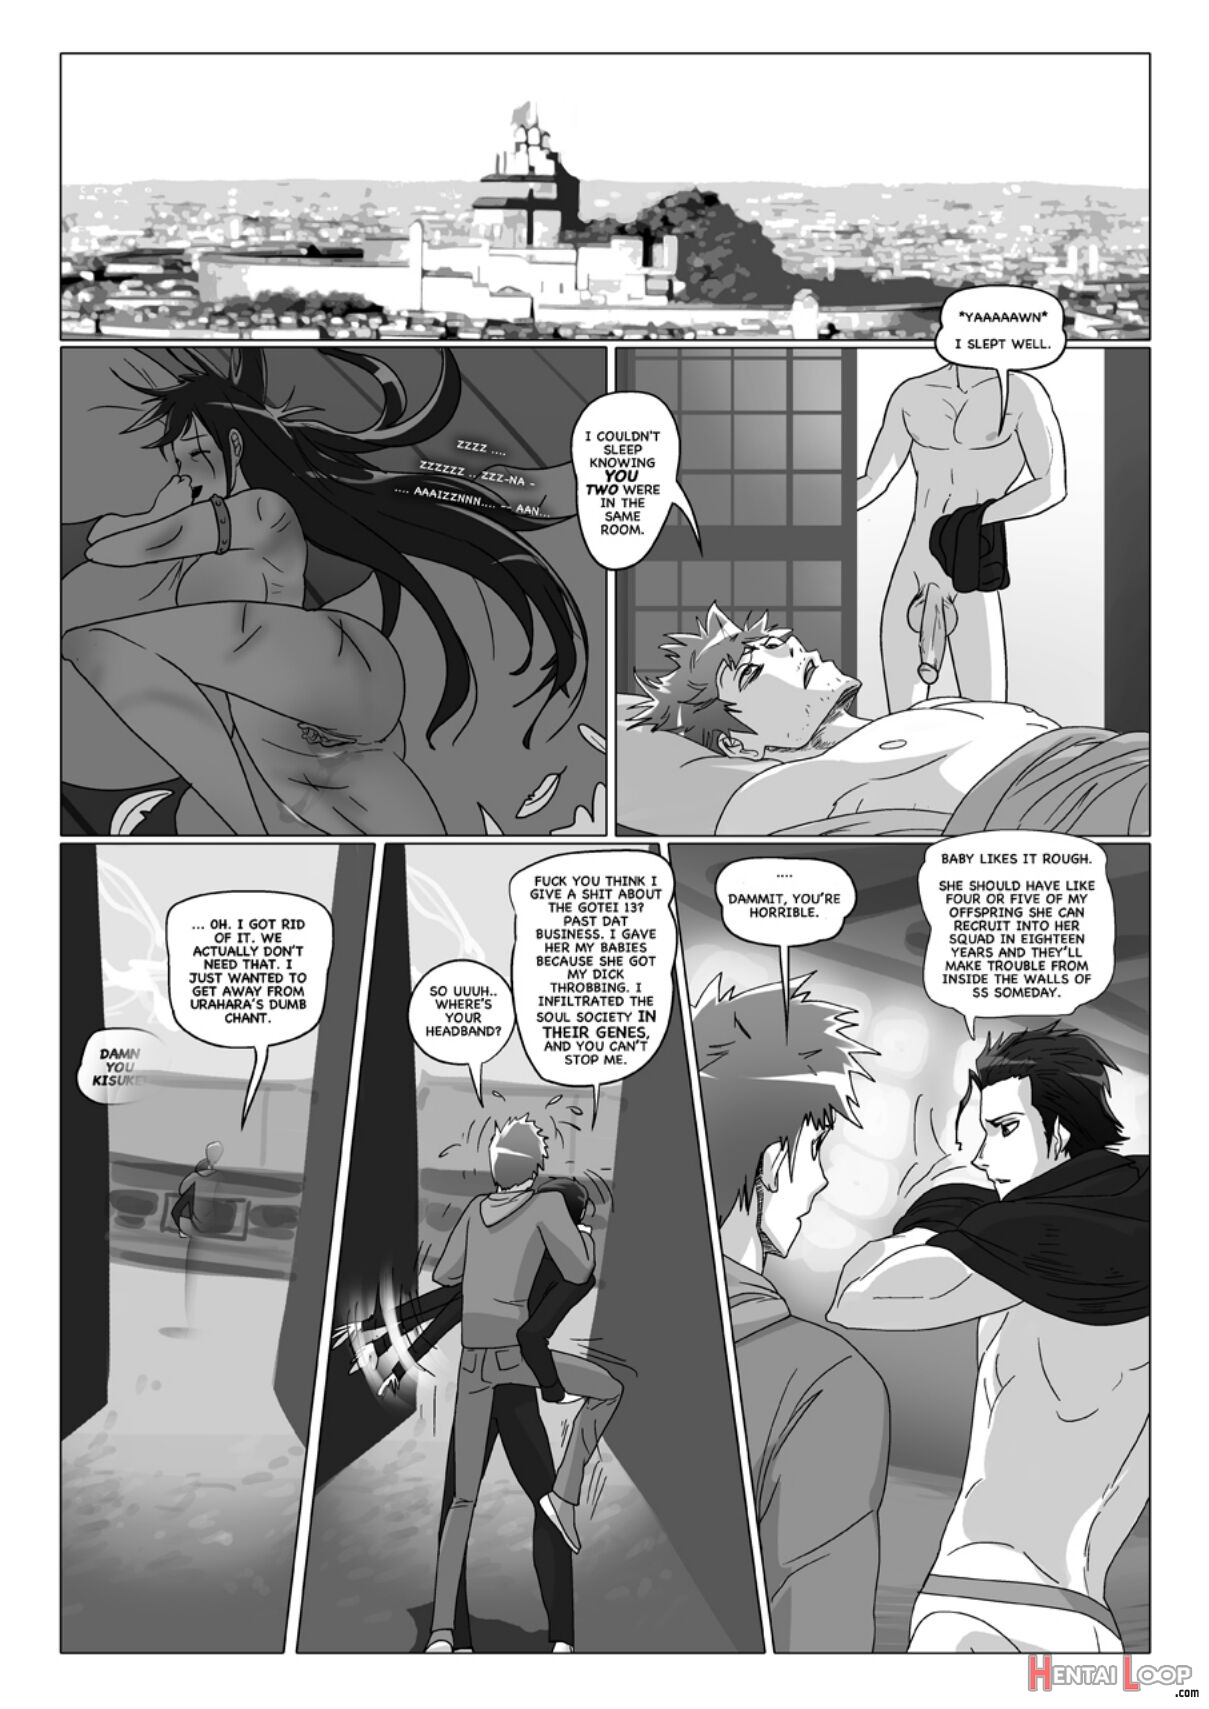 Happy To Serve You - Xxx Version page 320